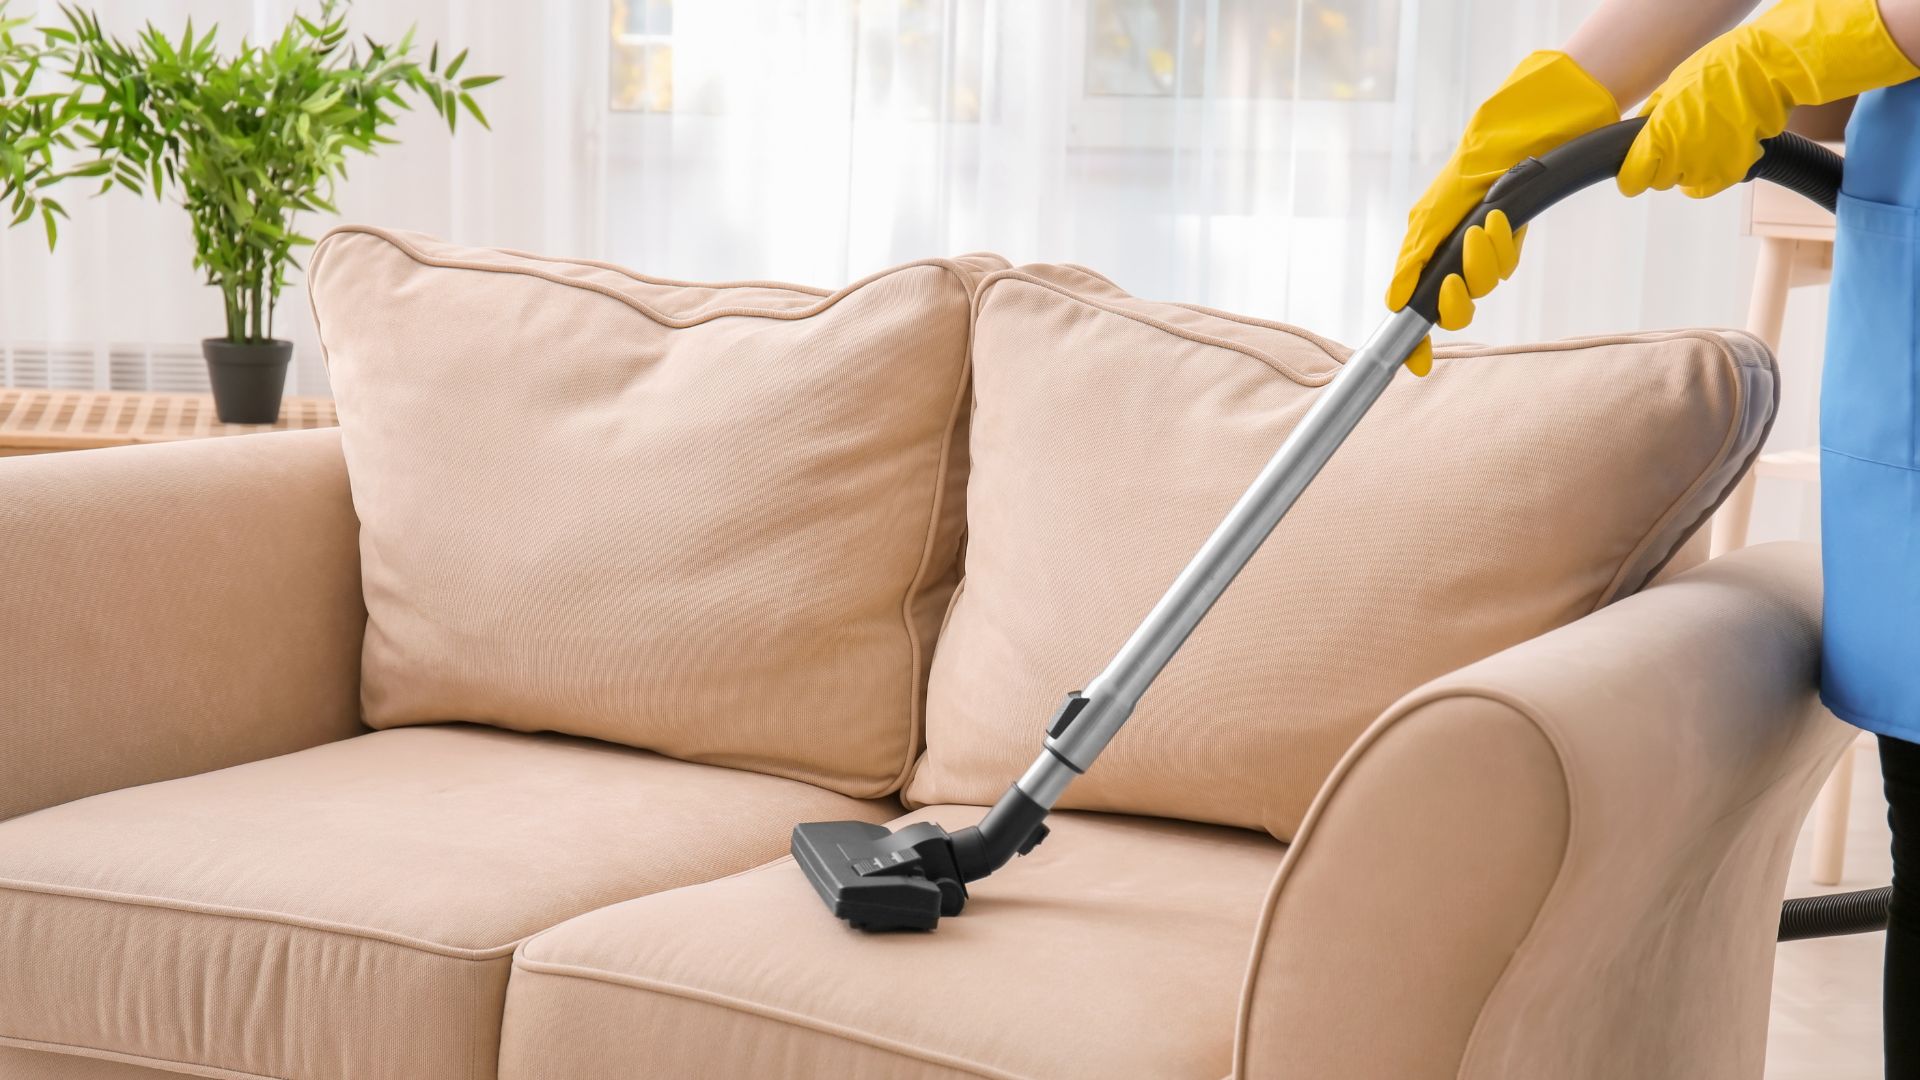 Couch cleaning with vacuum